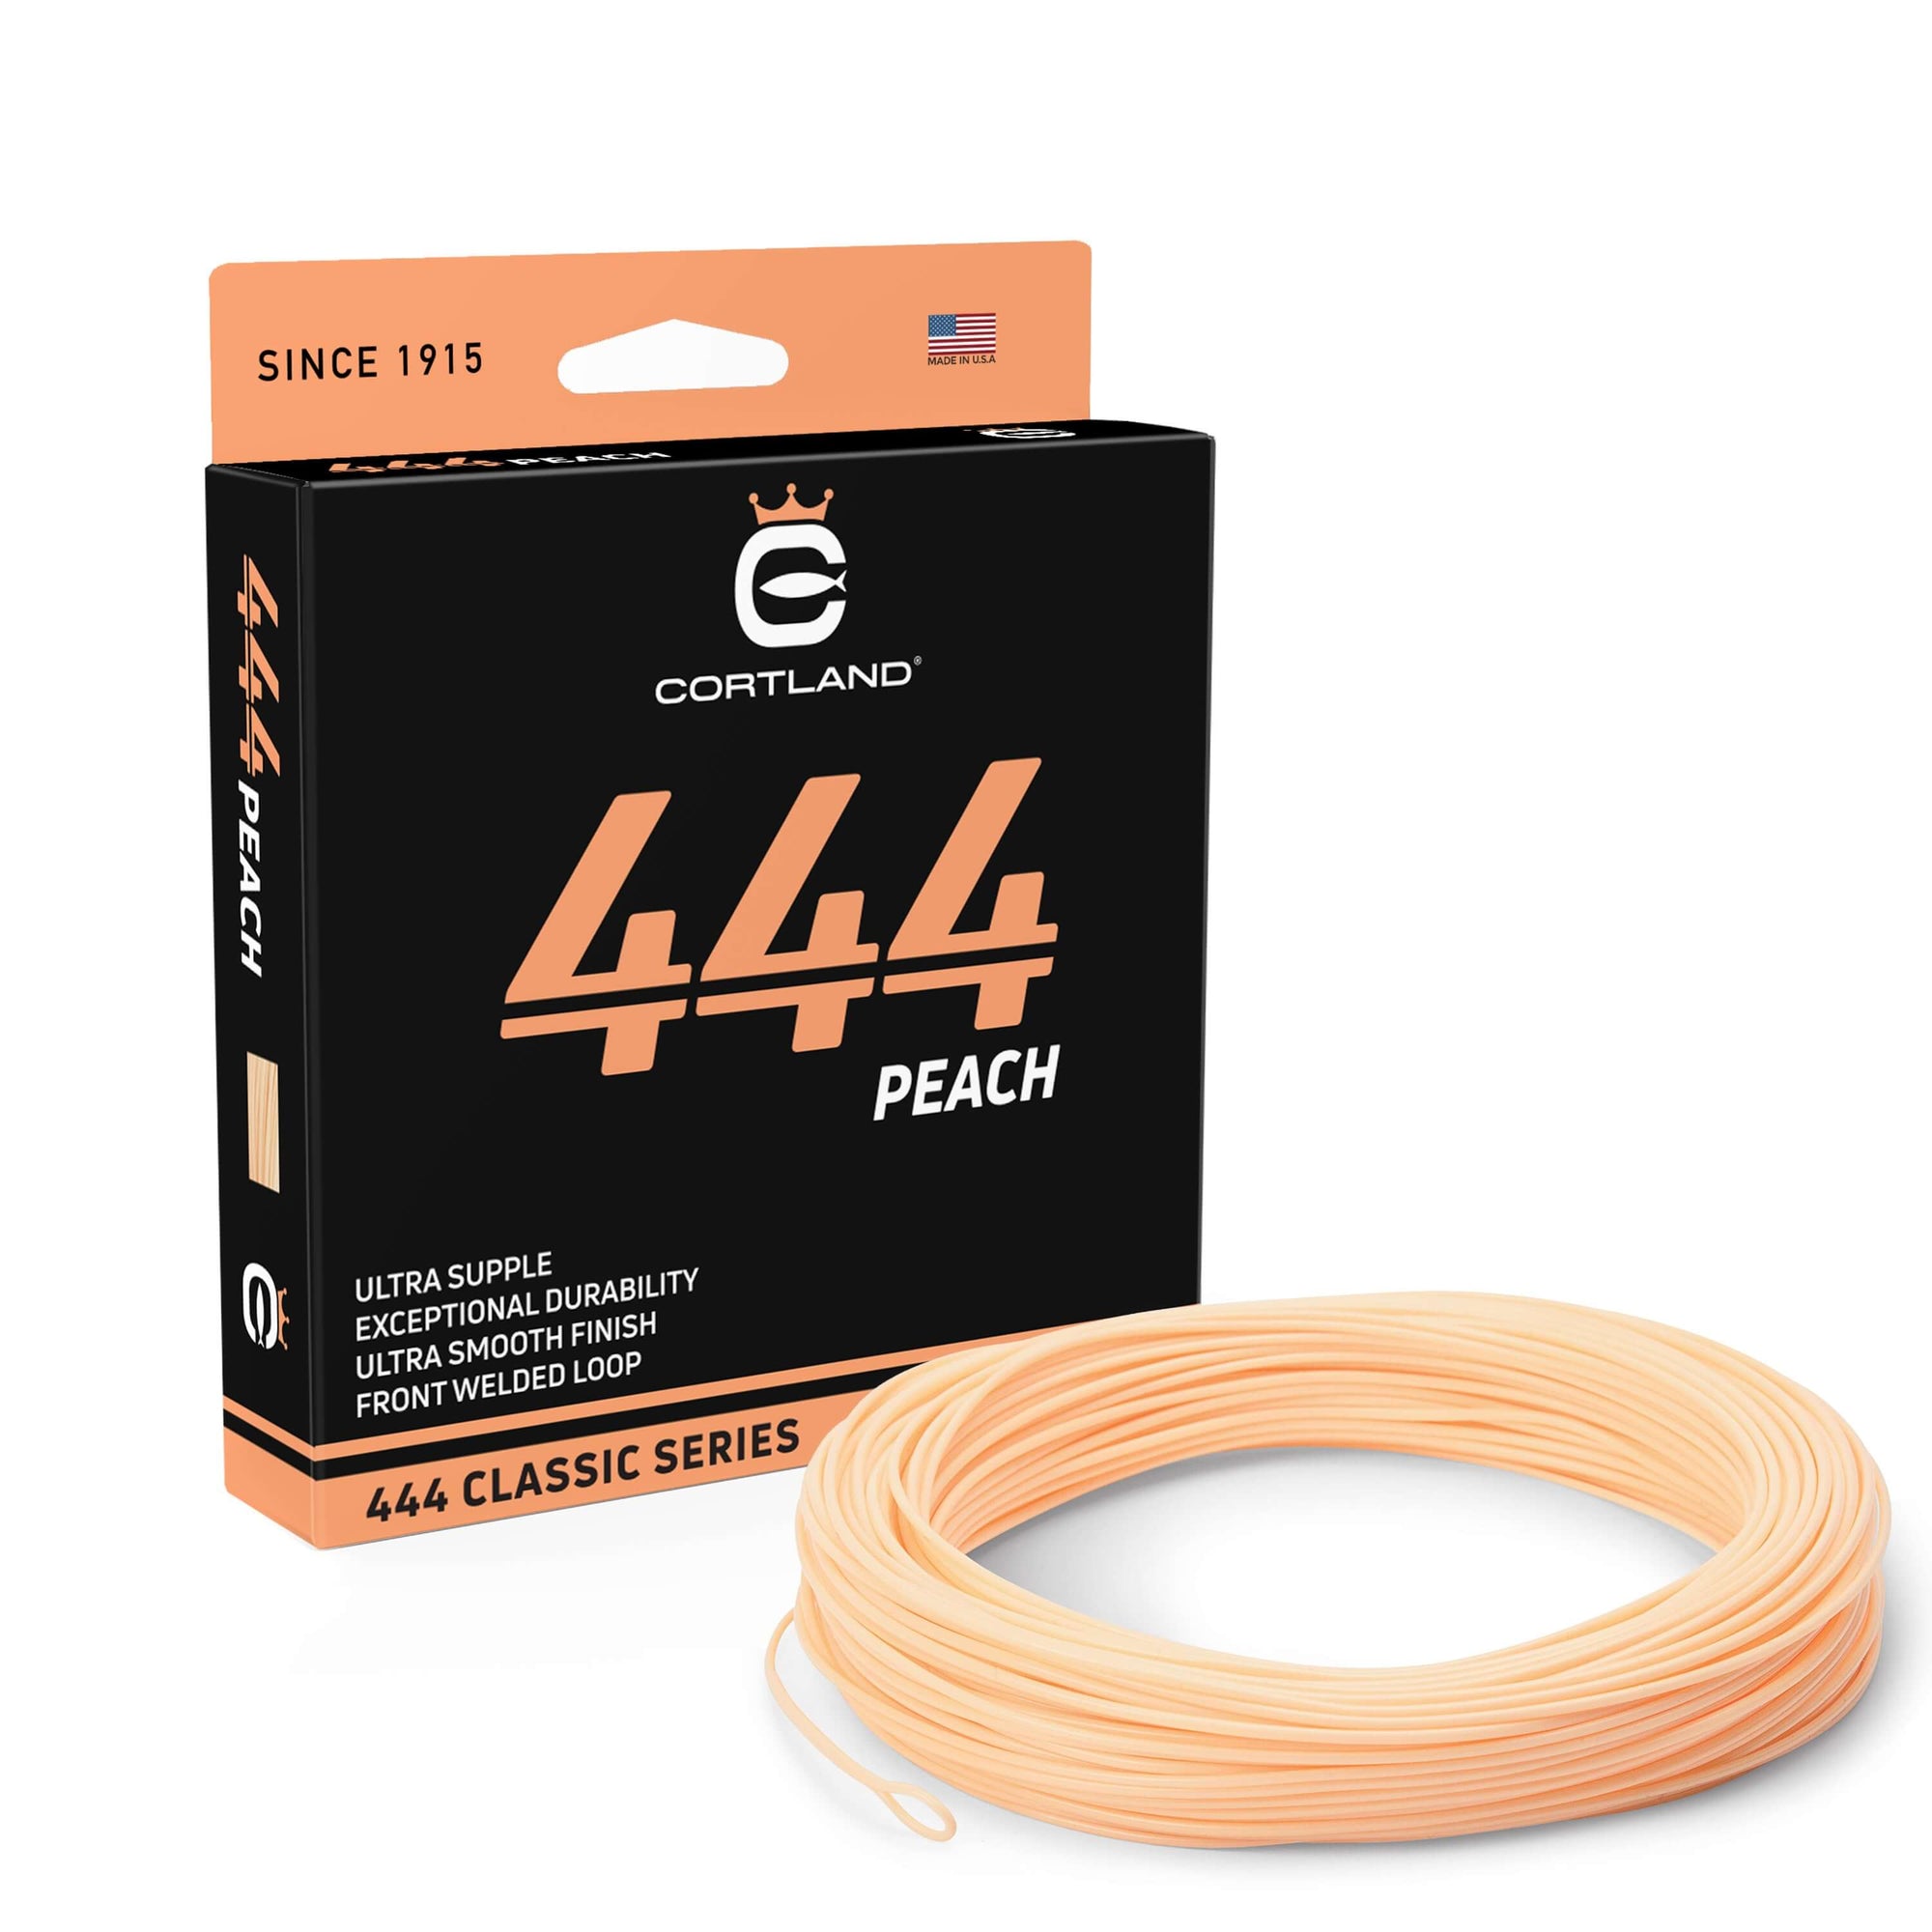 444 Series Peach Double Taper Fly Line and Box. The coil is peach. The box is black and peach. 